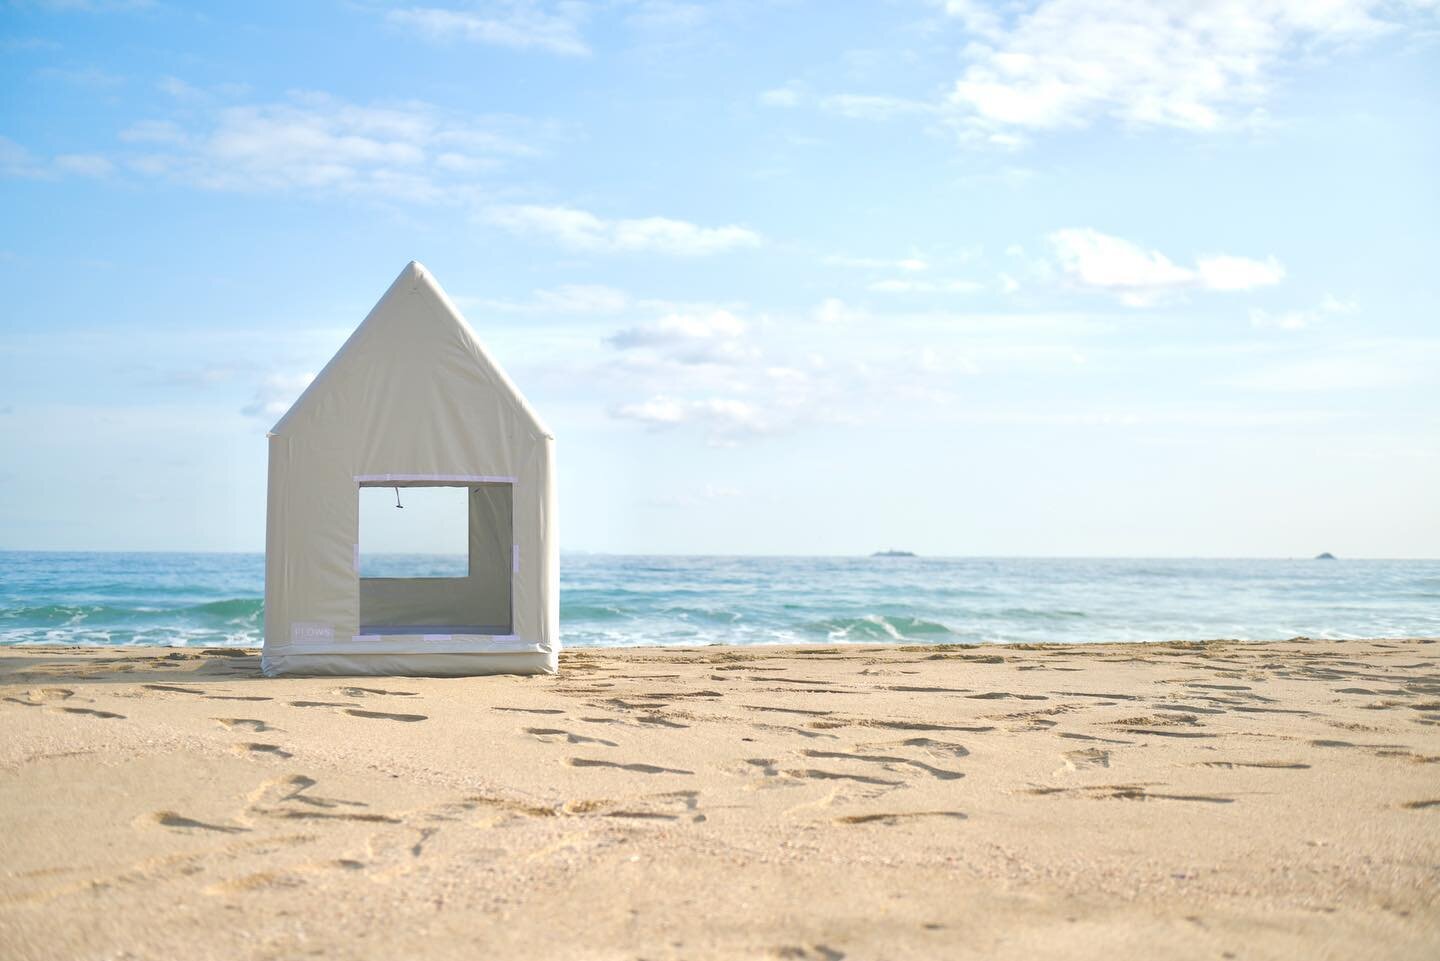 This summer with AirArchitecture

今年の夏はエアアーキテクチャで海遊び！

AirArchitecture &yen;123,000(tax)

#AirArchitecture #AirTatami #flowsinc #architecture #design #camp #建築 #テント #デザイン#tent #inflatabletent #inflatablemat #inflatablefuniture #beachtent 
#outdoor #l